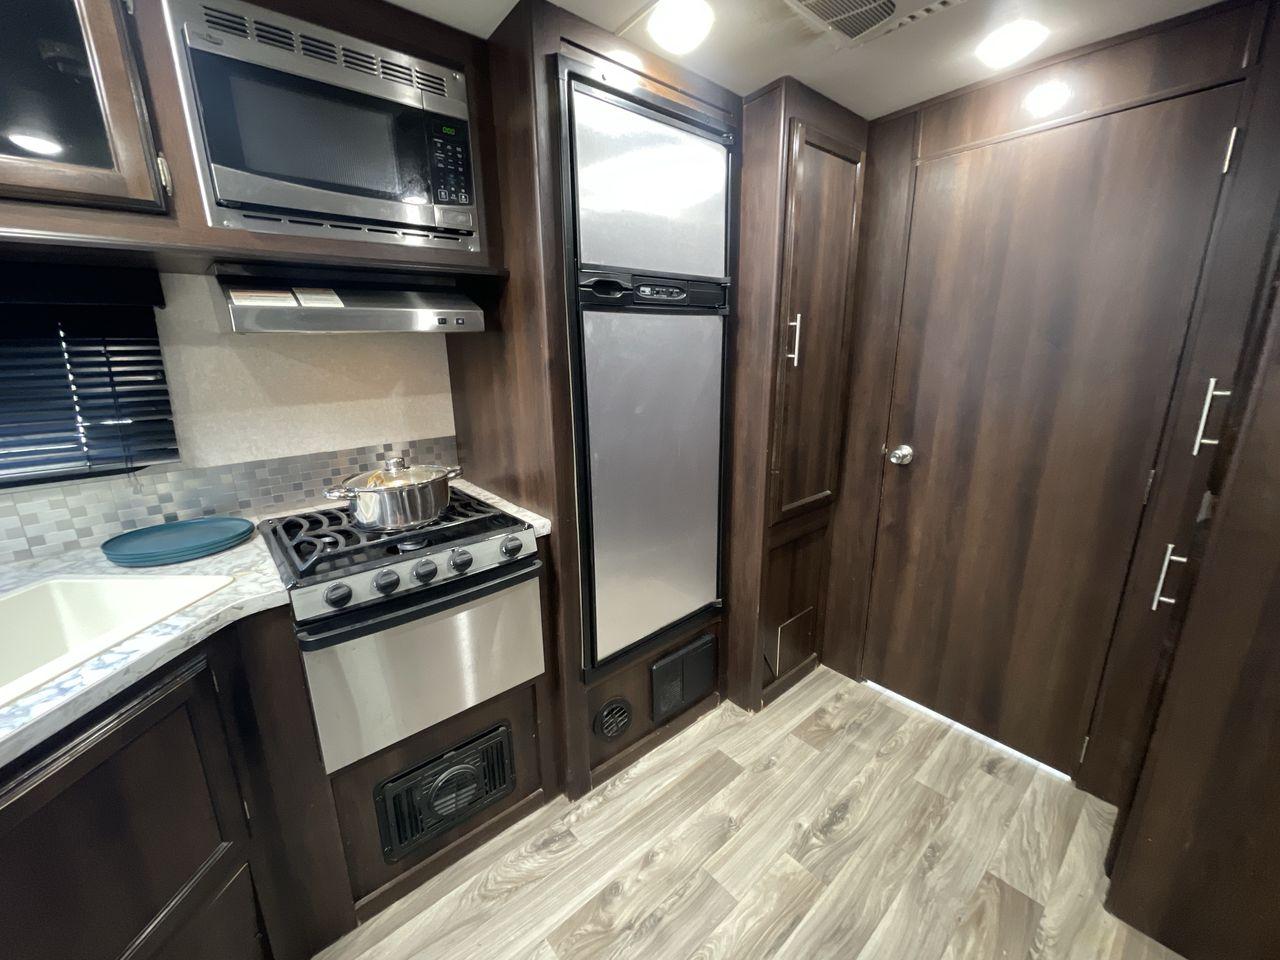 2018 WHITE JAYCO JAY FLIGHT 23MRB (1UJBJ0BN5J1) , Length: 28.17 ft | Dry Weight: 5,560 lbs. | Gross Weight: 7,250 lbs. | Slides: 1 transmission, located at 4319 N Main St, Cleburne, TX, 76033, (817) 678-5133, 32.385960, -97.391212 - The 2018 Jayco Jay Flight 23MRB is a travel trailer that encapsulates both compactness and luxury for unparalleled camping experiences. Spanning 28 feet in length, this model boasts a thoughtfully arranged interior featuring a single slide-out, seamlessly amplifying the living space. The Jay Flight - Photo #14